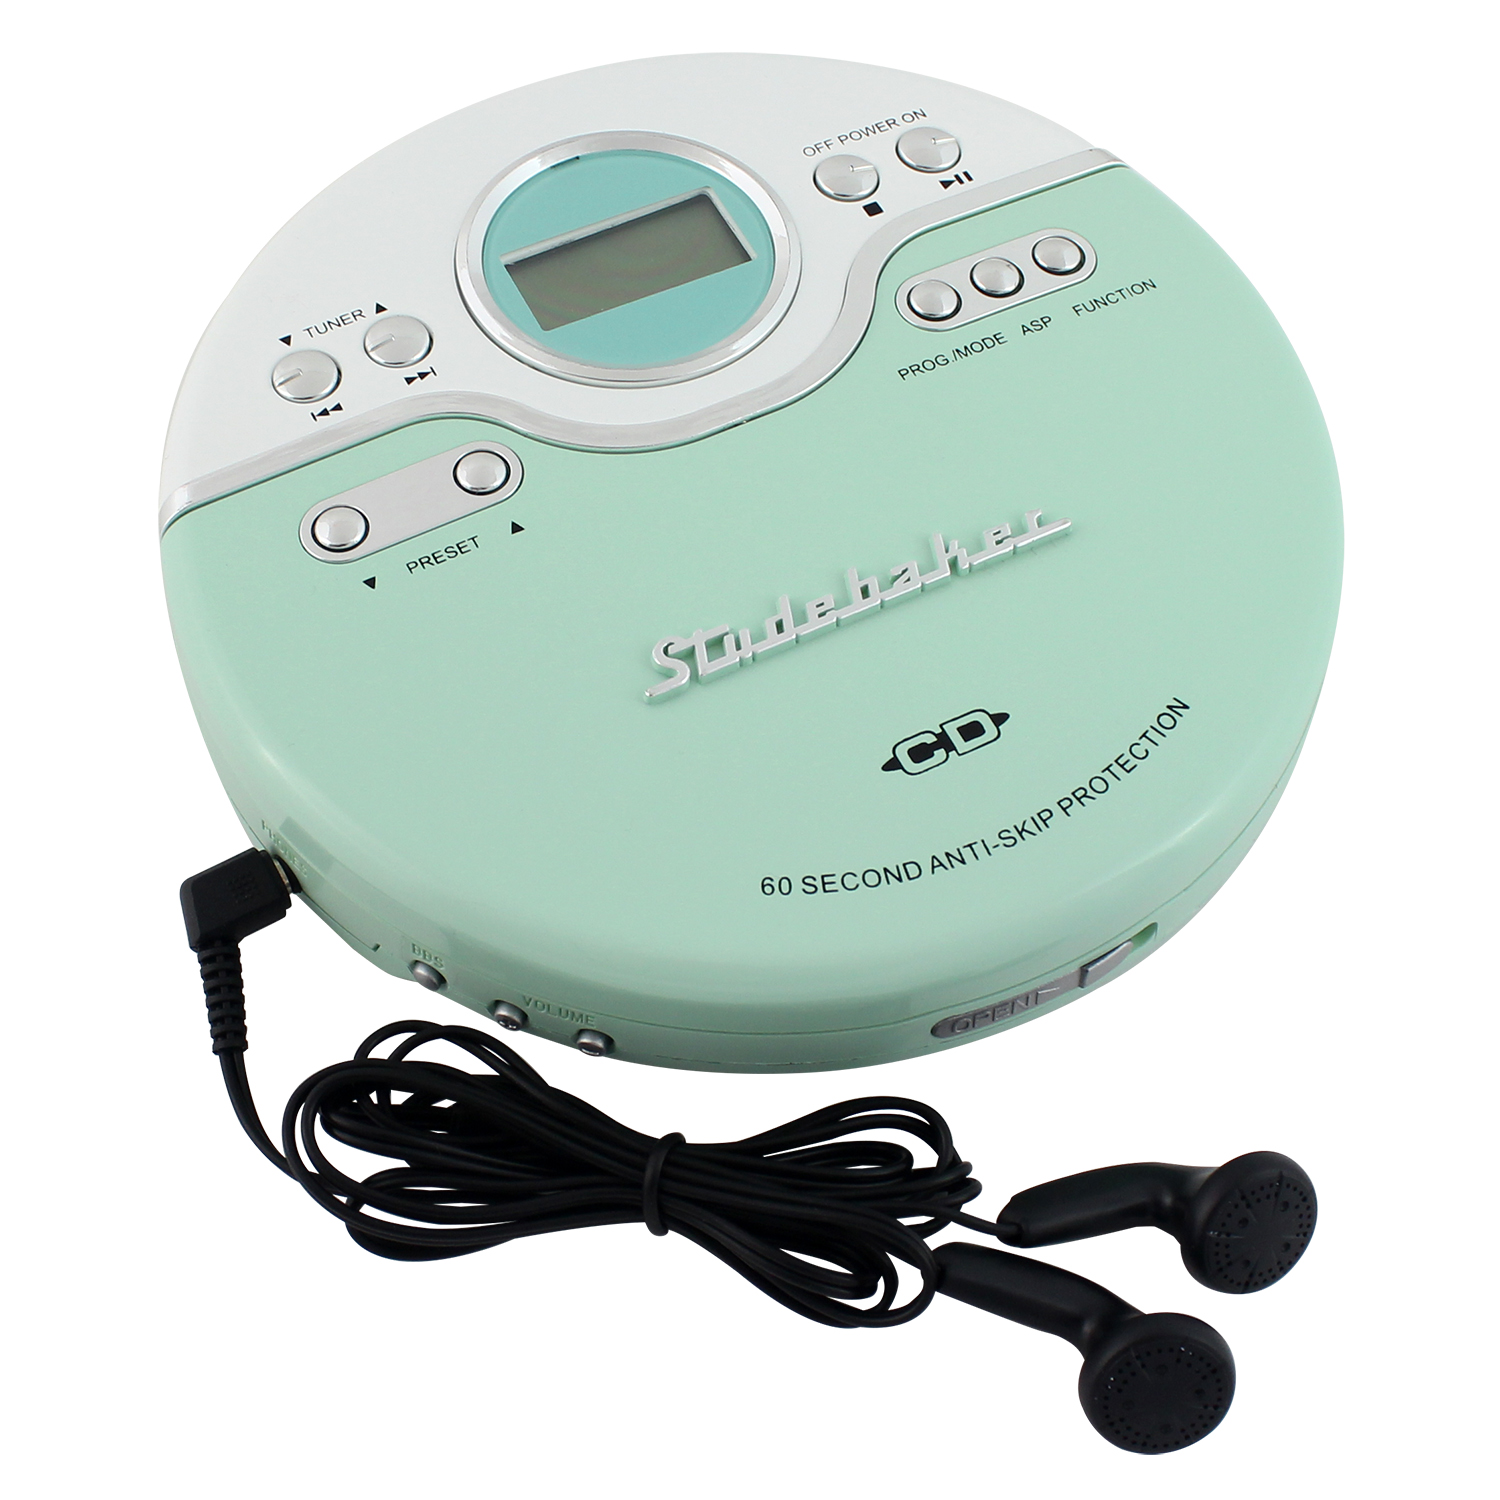 Studebaker Sb3703mw Personal Jogging CD Player with FM Pll Radio (Mint Green/white) - image 2 of 5